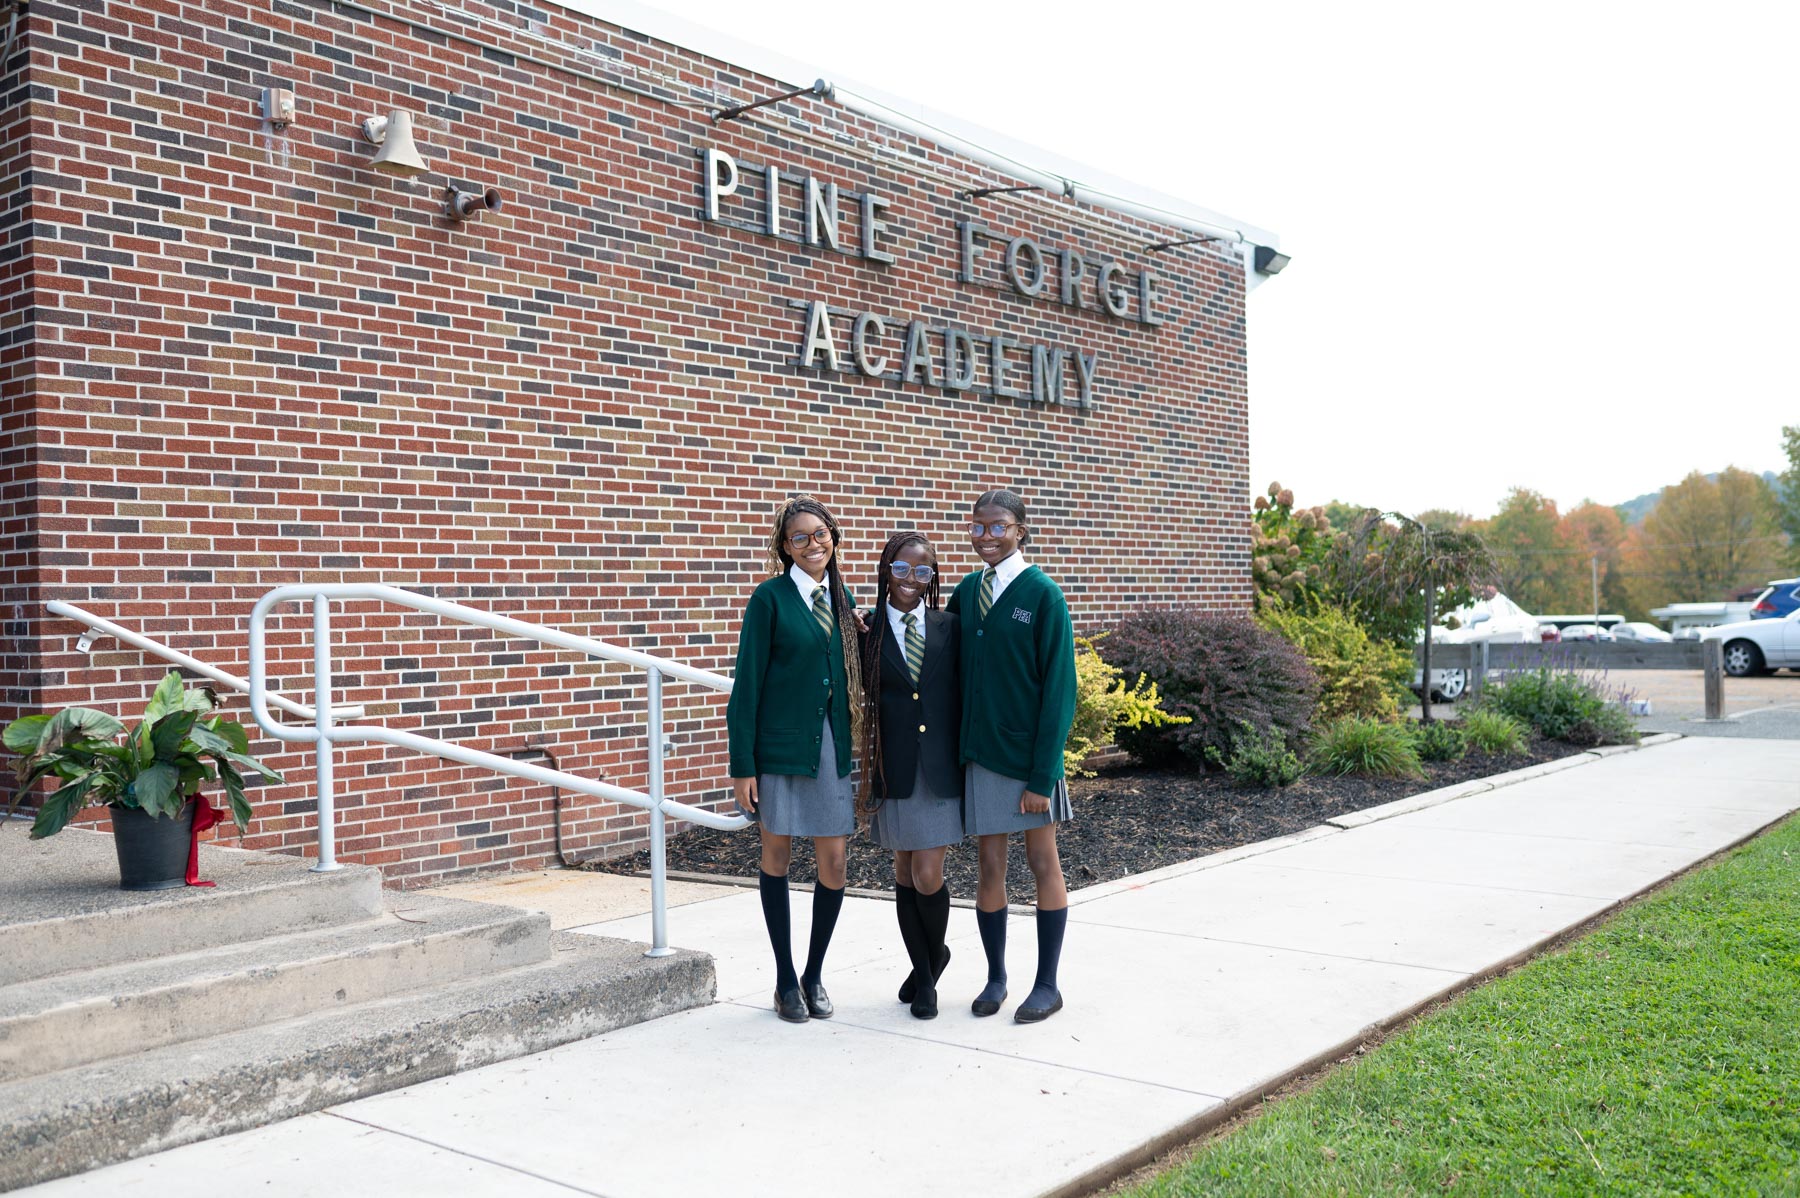 Three Girls Standing Outside the Main Academic Building